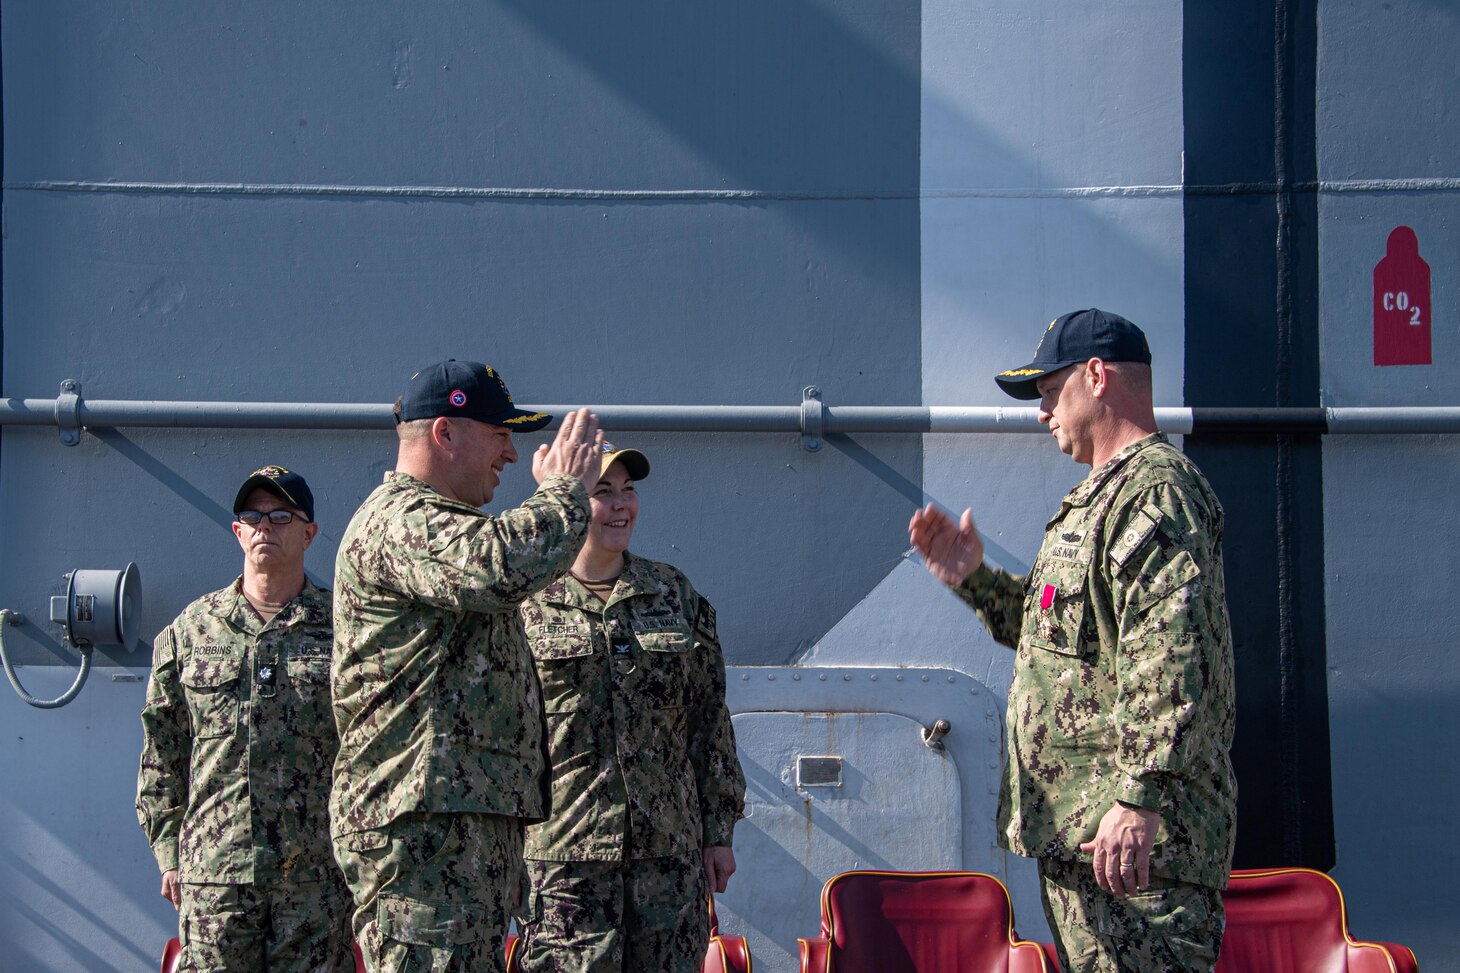 Capt. Manuel Pardo, left, eighth commanding officer of the forward-deployed amphibious assault carrier USS America (LHA 6), assumes command from Capt. Shockey Snyder at a change of command on the ship’s flight deck during a scheduled port visit to Brisbane, Australia, July 14, 2023. America, lead ship of the America Amphibious Ready Group, is operating in the U.S. 7th Fleet area of operations. U.S. 7th Fleet is the U.S. Navy’s largest forward-deployed numbered fleet, and routinely interacts and operates with allies and partners in preserving a free and open Indo-Pacific region.